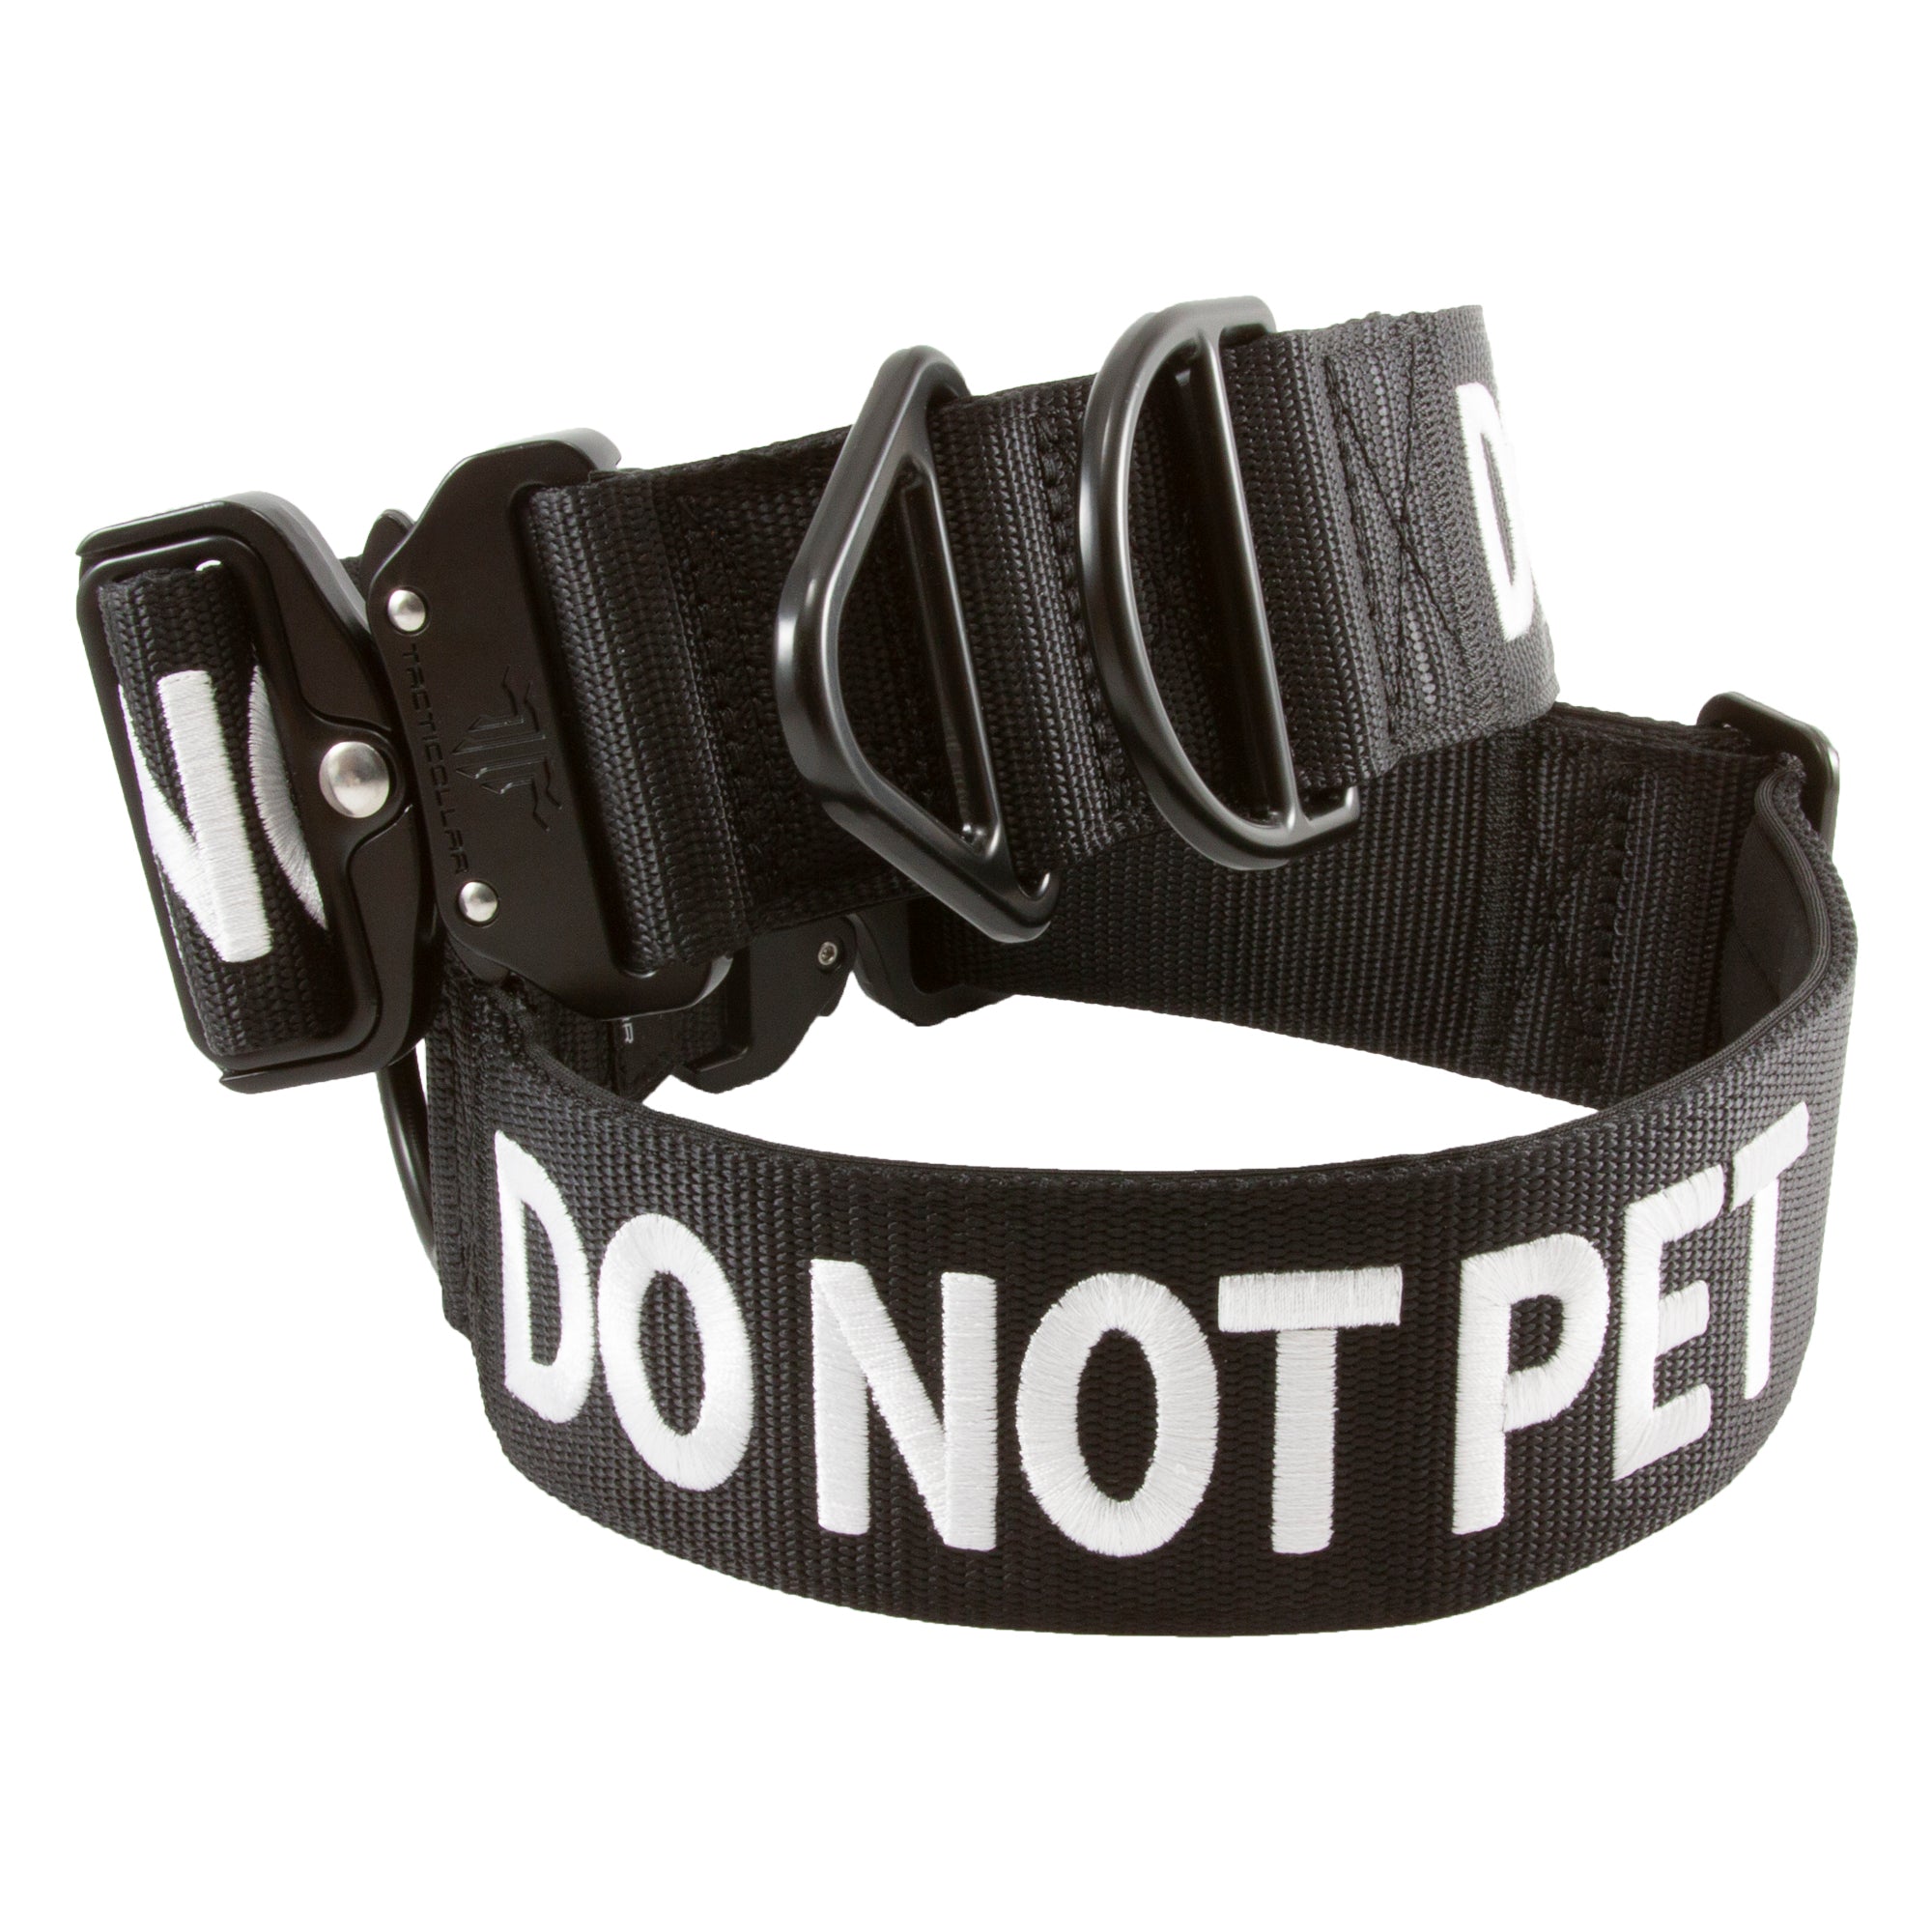 Do Not Pet Patch Small Dog Harness 